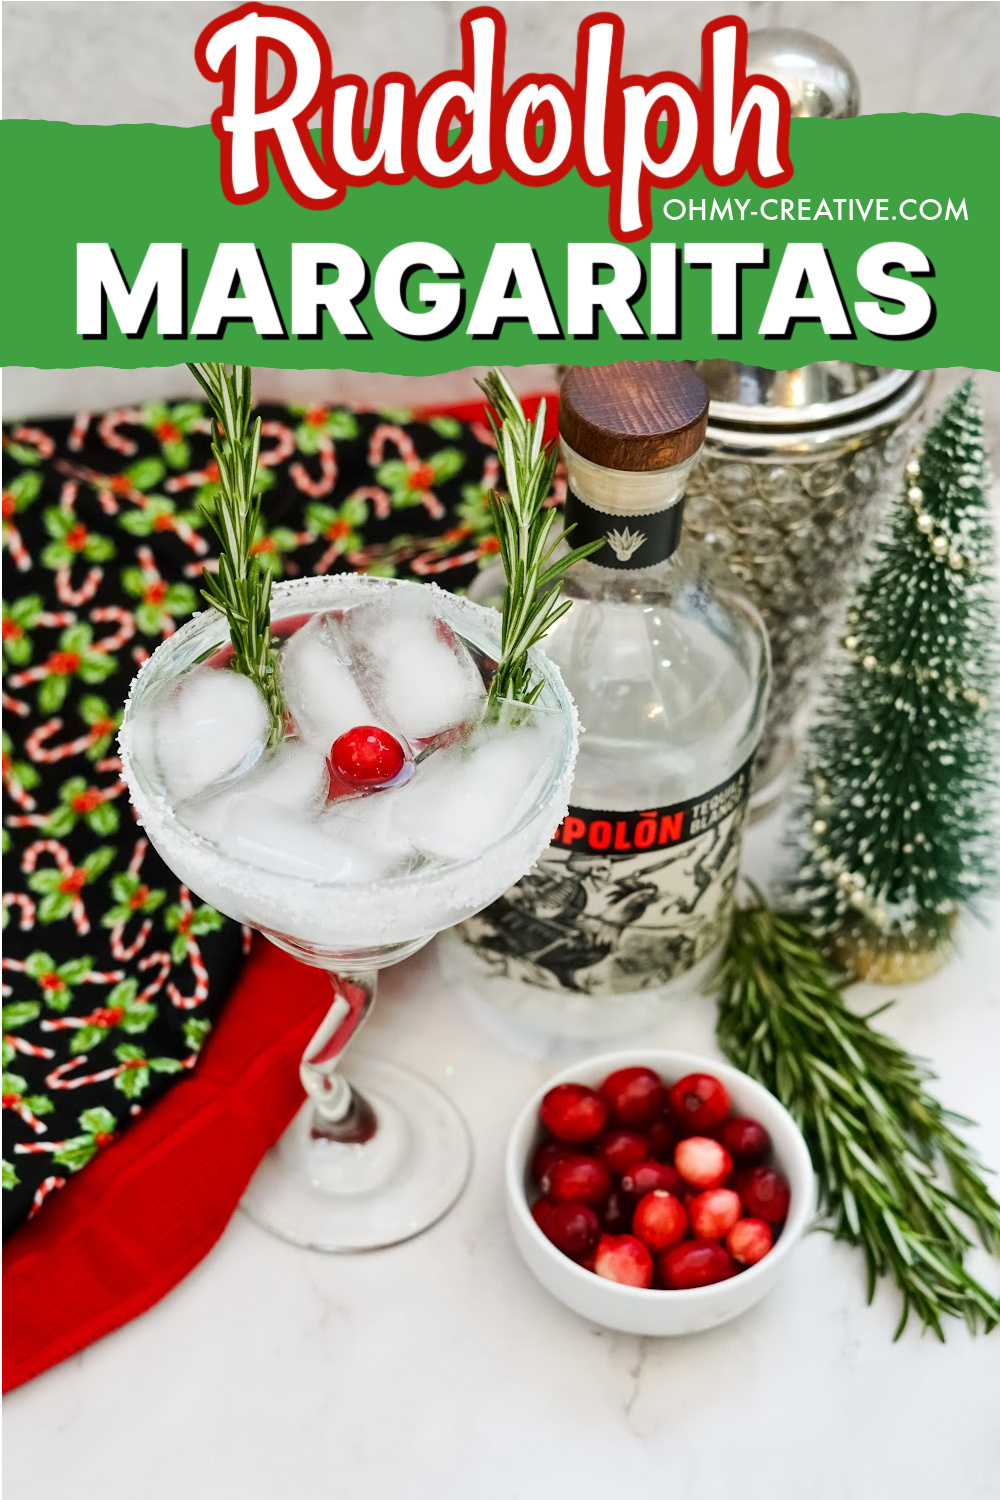 Make Merry With This Rudolph Margarita